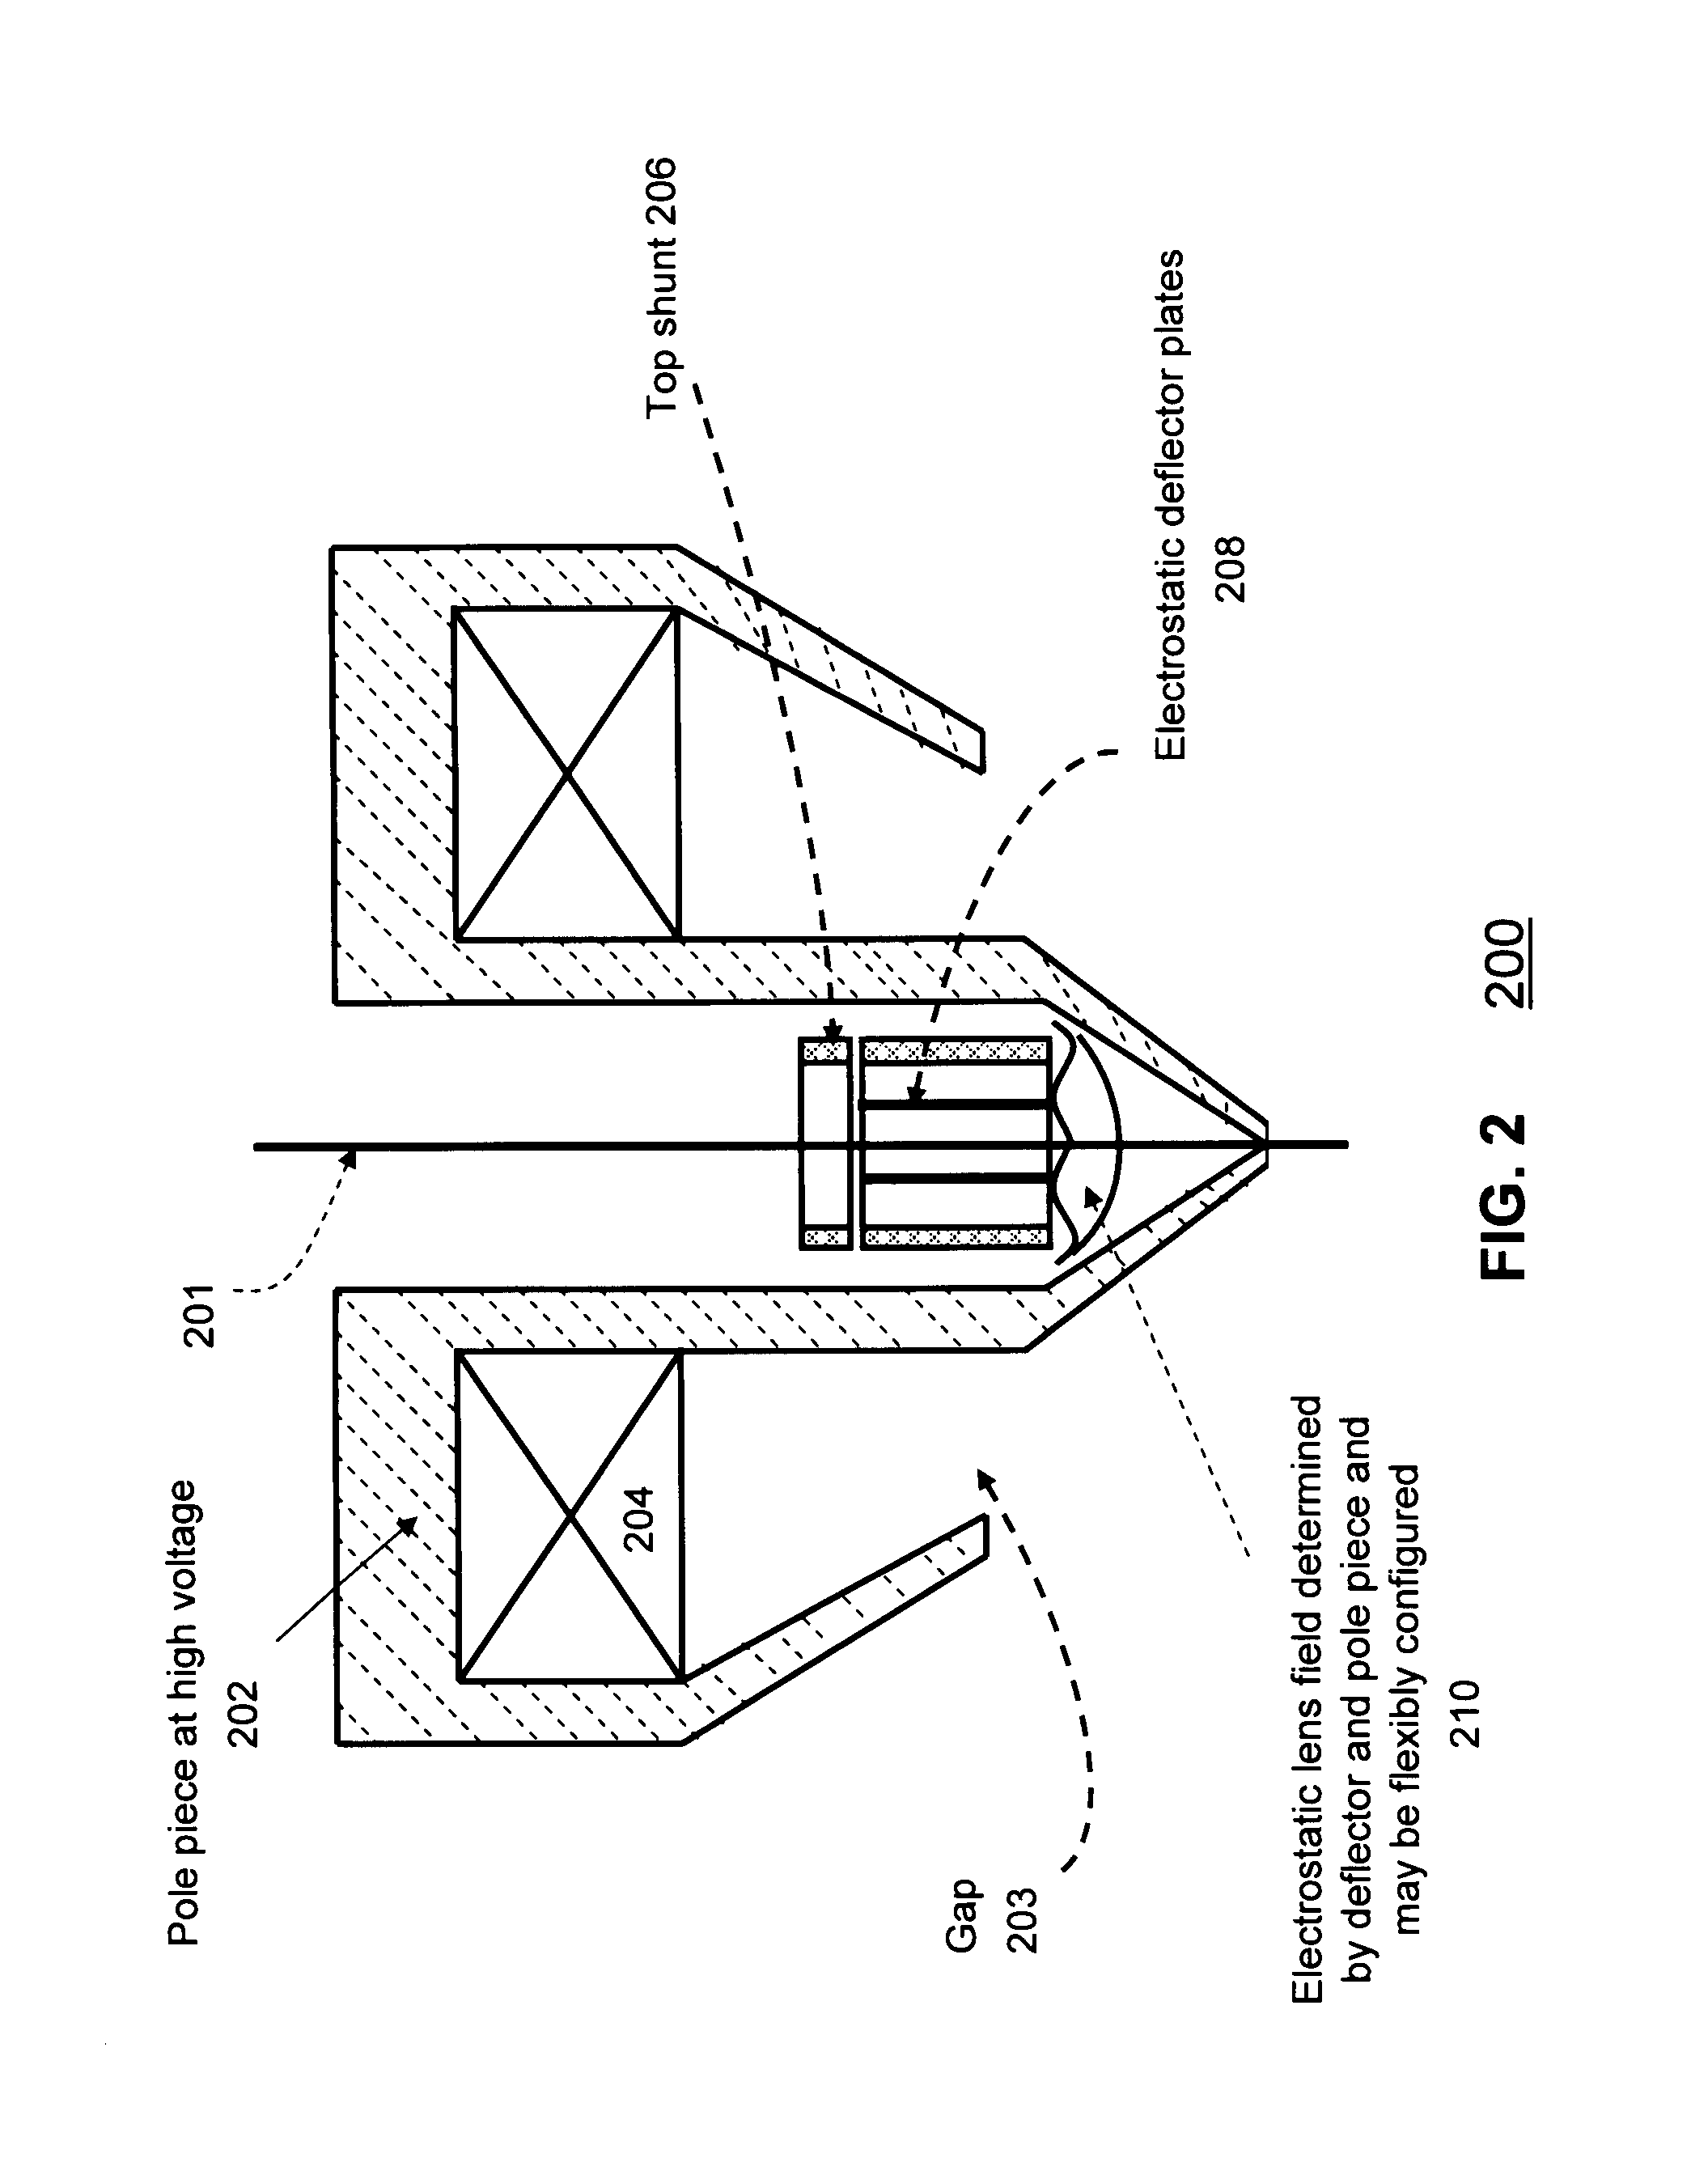 Objective lens with deflector plates immersed in electrostatic lens field